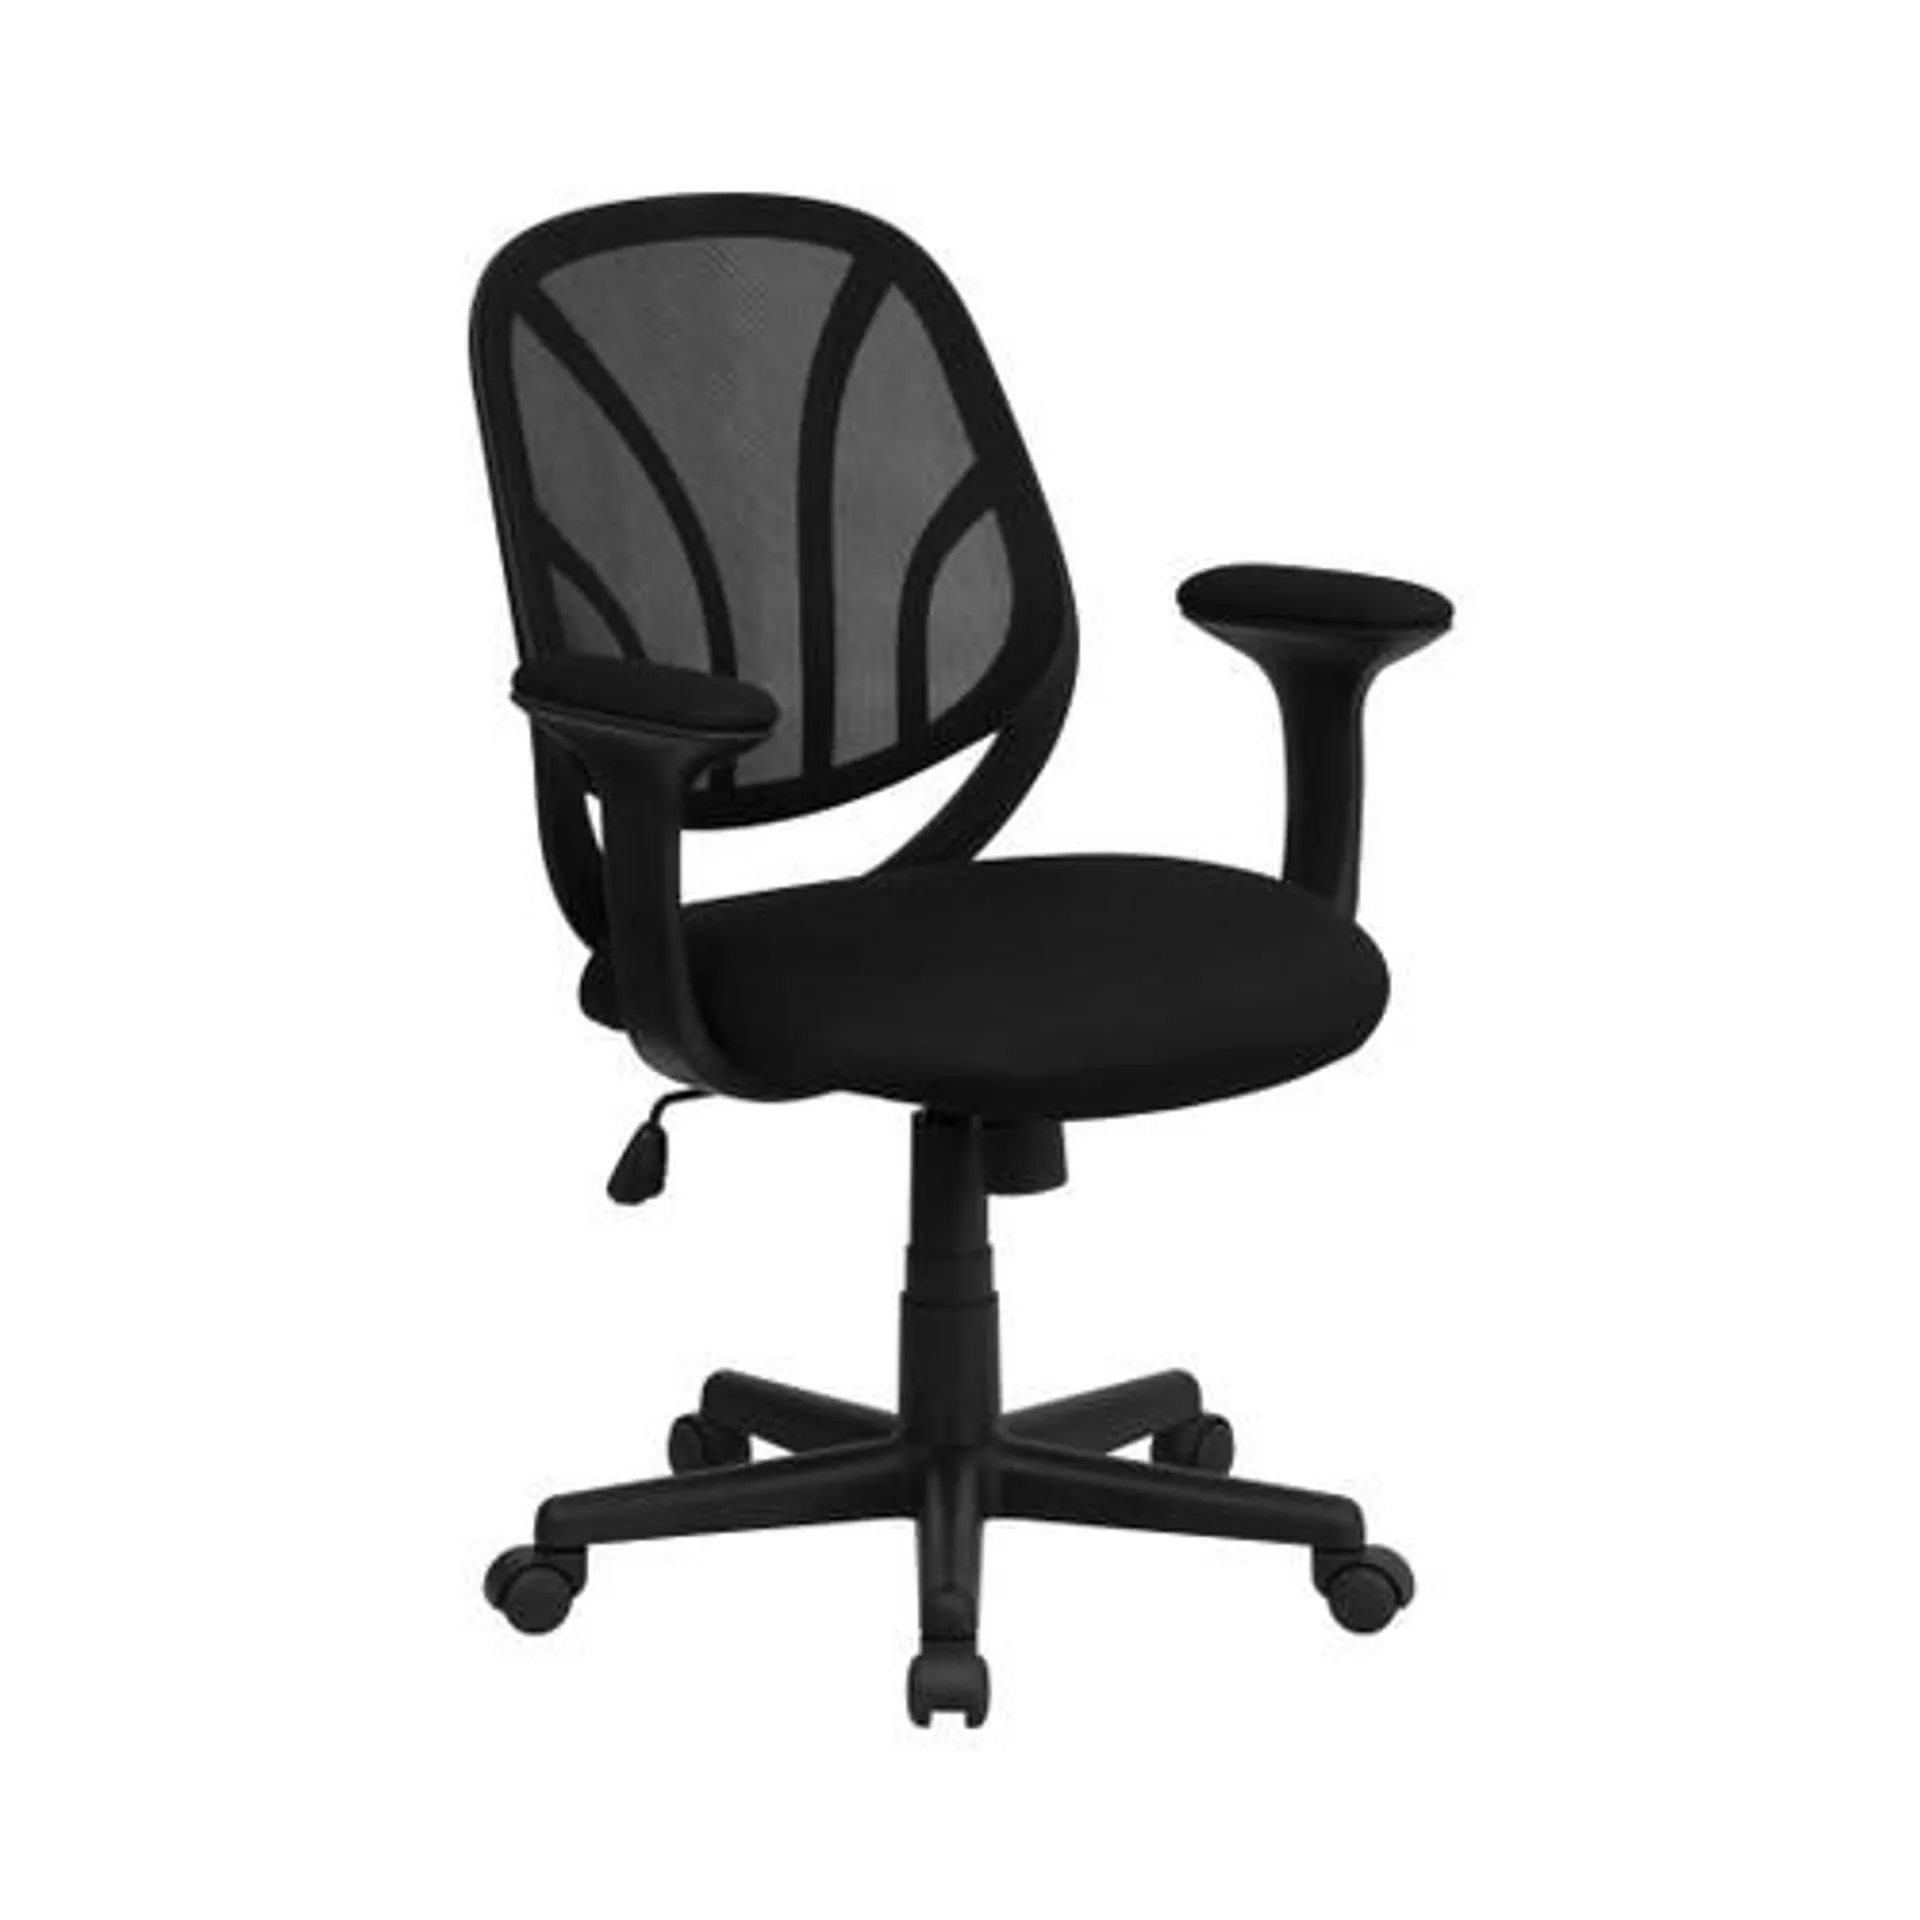 Y-GO Office Chair™ Mid-Back Black Mesh Swivel Task Office Chair with Arms - GOWY05AGG